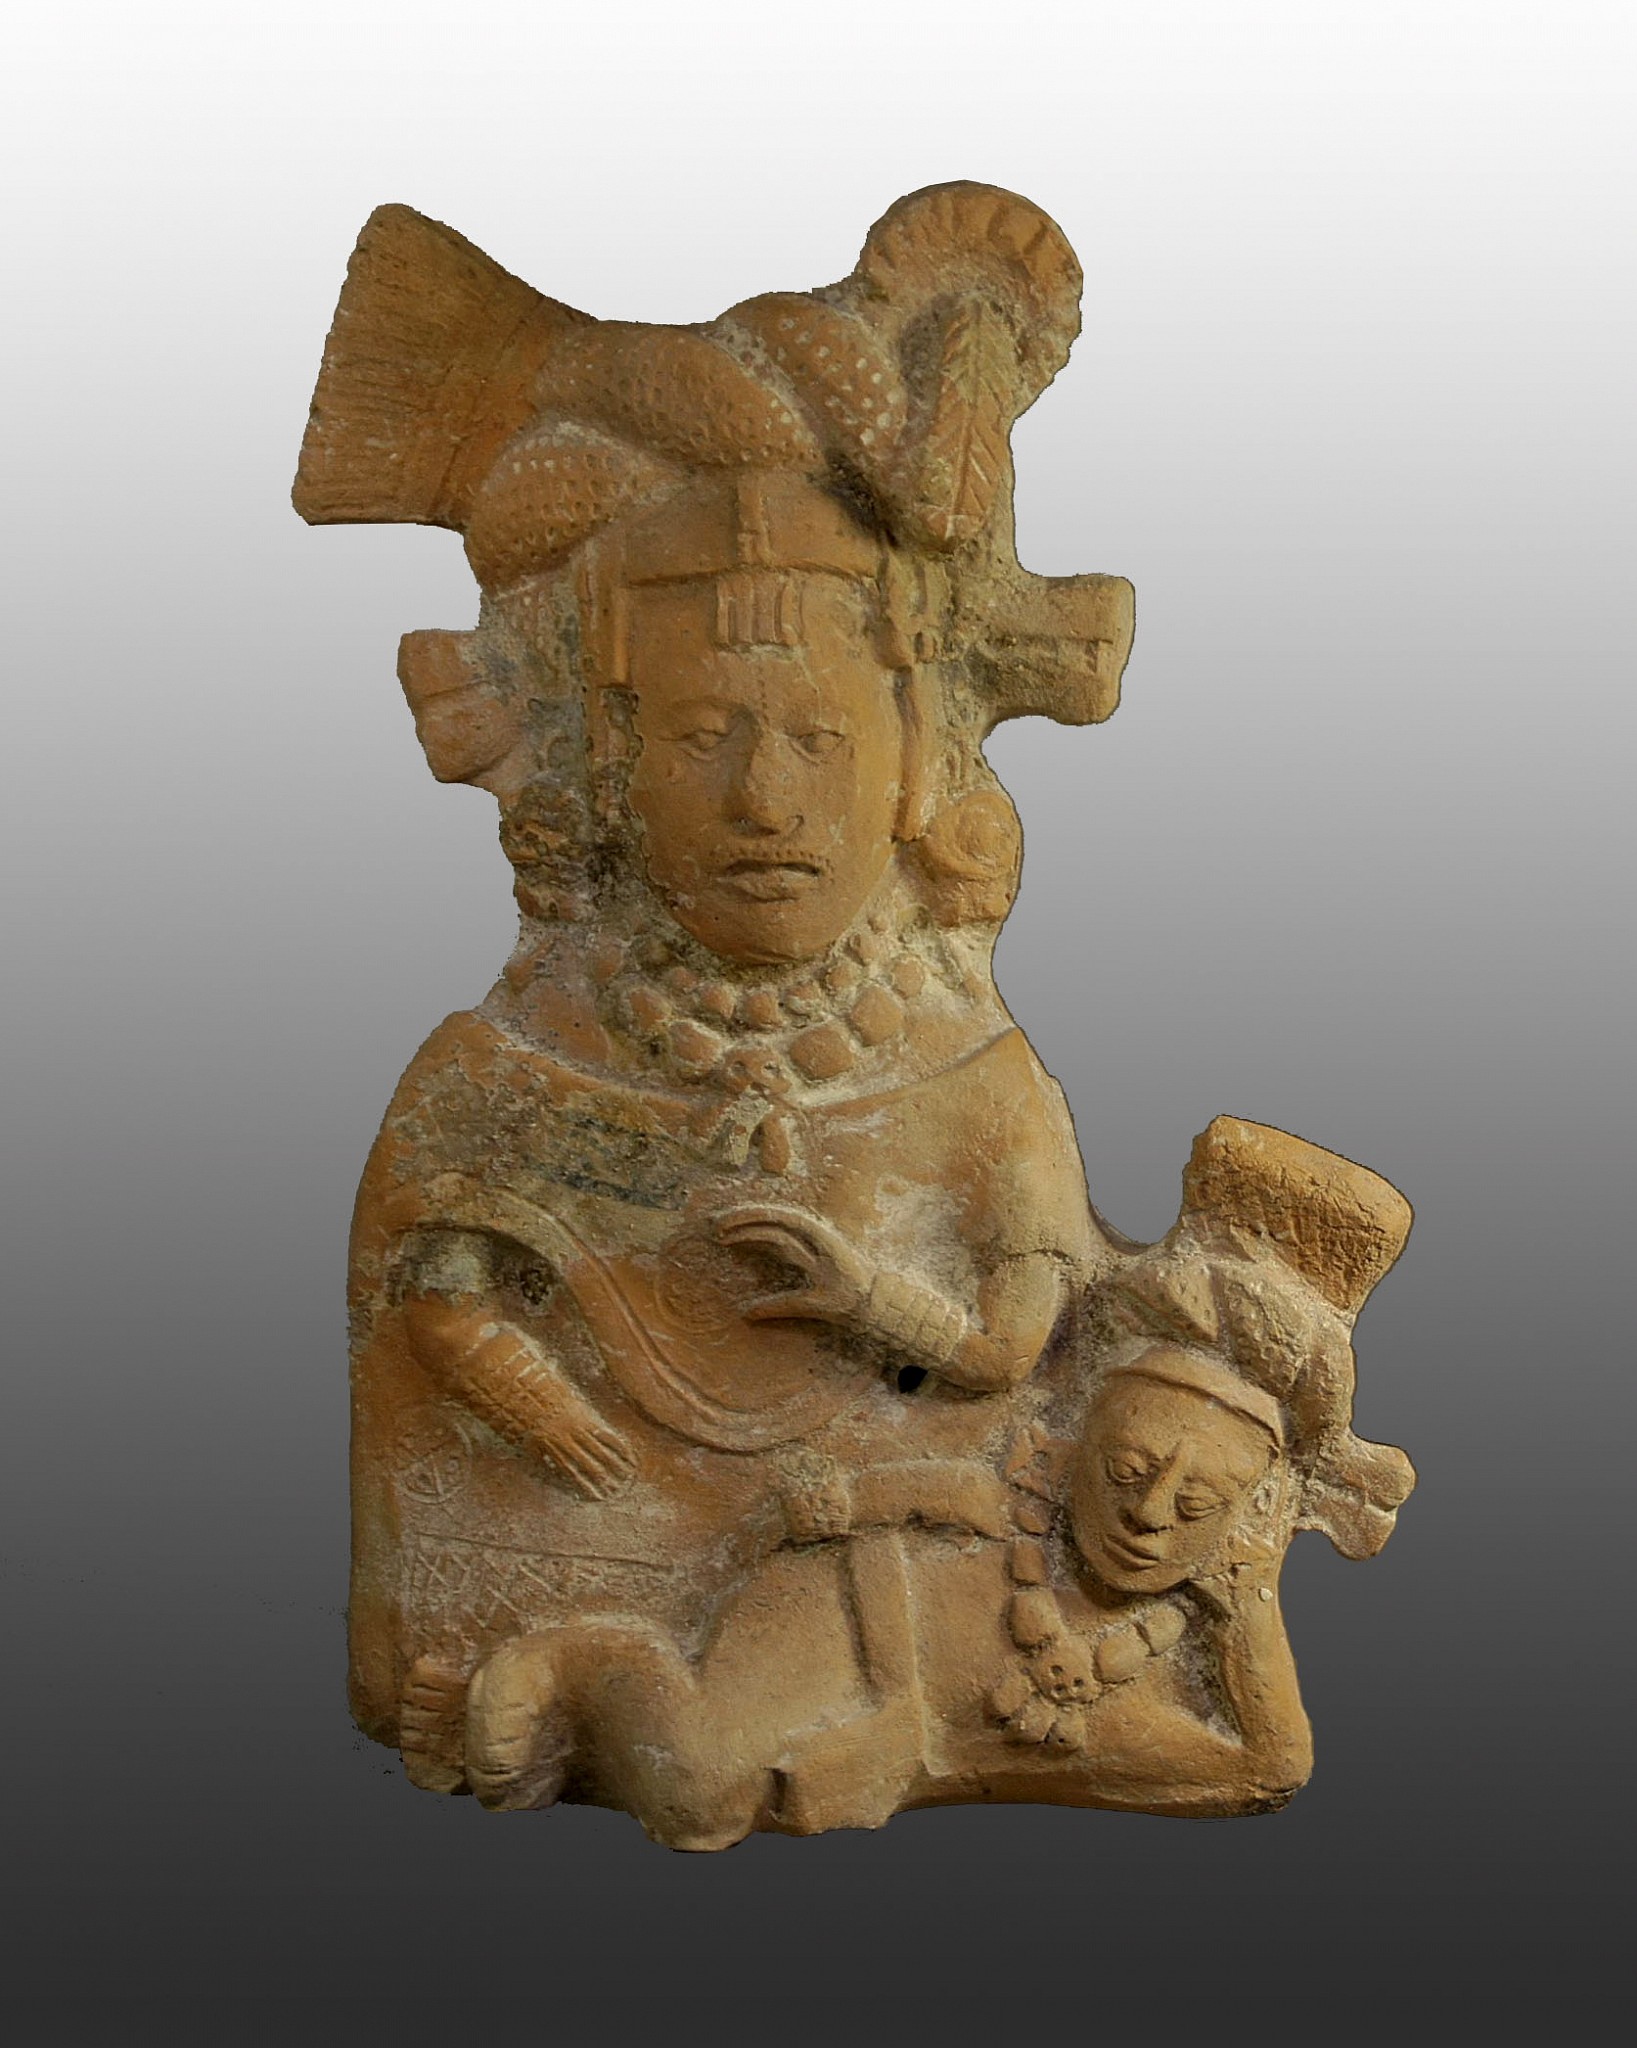 Mexico, Mayan Ceramic Figural Rattle of A Female Figure with Child
This high-ranking noble Jaina female wears a cloth and feather turban, ear spools, a heavy beaded collar piece and a slip-on quexquemitl over a skirt decorated with roundels and cross-hatching around the hem. Her face has a discreet scarification pattern in the center of the forehead and around the upper lip. The male child lying at her feet has a similar turban, beaded necklace, and a simple loincloth. Jaina-style figurines were exchanged along a 500 mile trade route.  These figurines were hand-modeled with hollow, mold-made bodies, and joined to plain backs made by hand or molded. This figure can function as a whistle, flute, or rattle. For the Maya, enabling figurines to make sound animated them with the essence of life: air.
Media: Ceramic
Dimensions: Height: 8 1/2"
$4,500
N6011